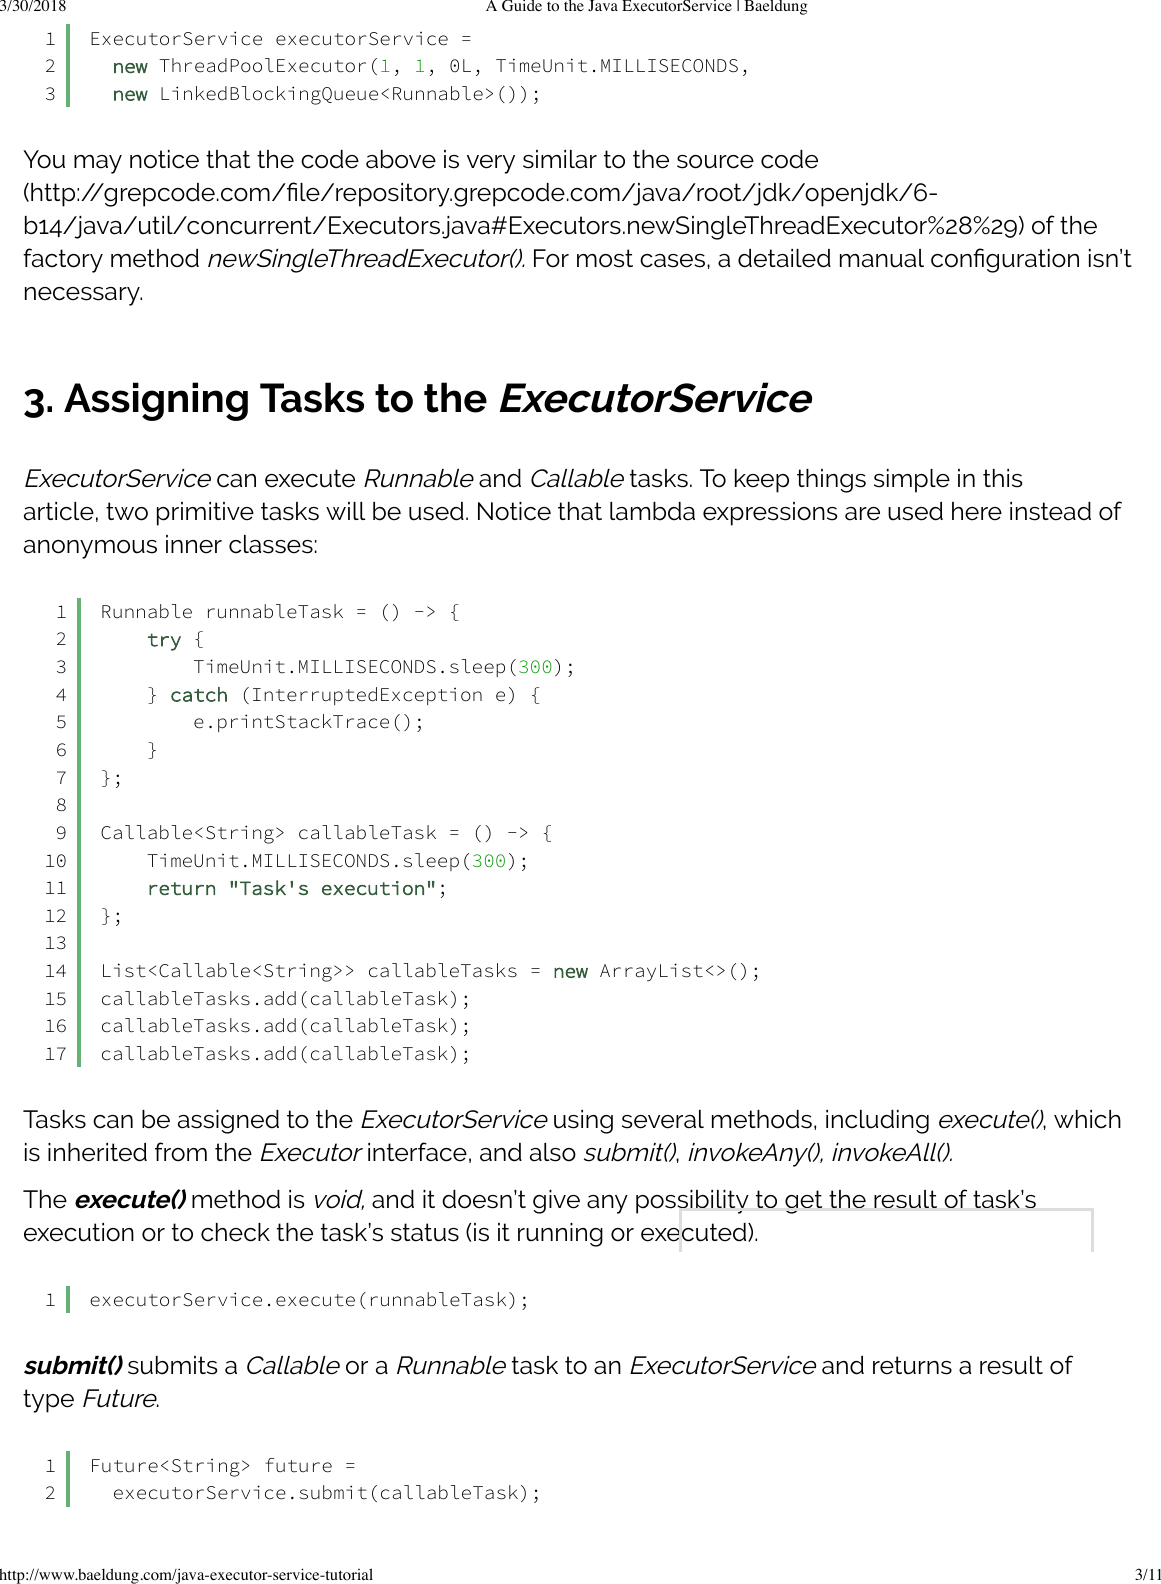 Page 3 of 7 - A Guide To The Java Executor Service  Baeldung